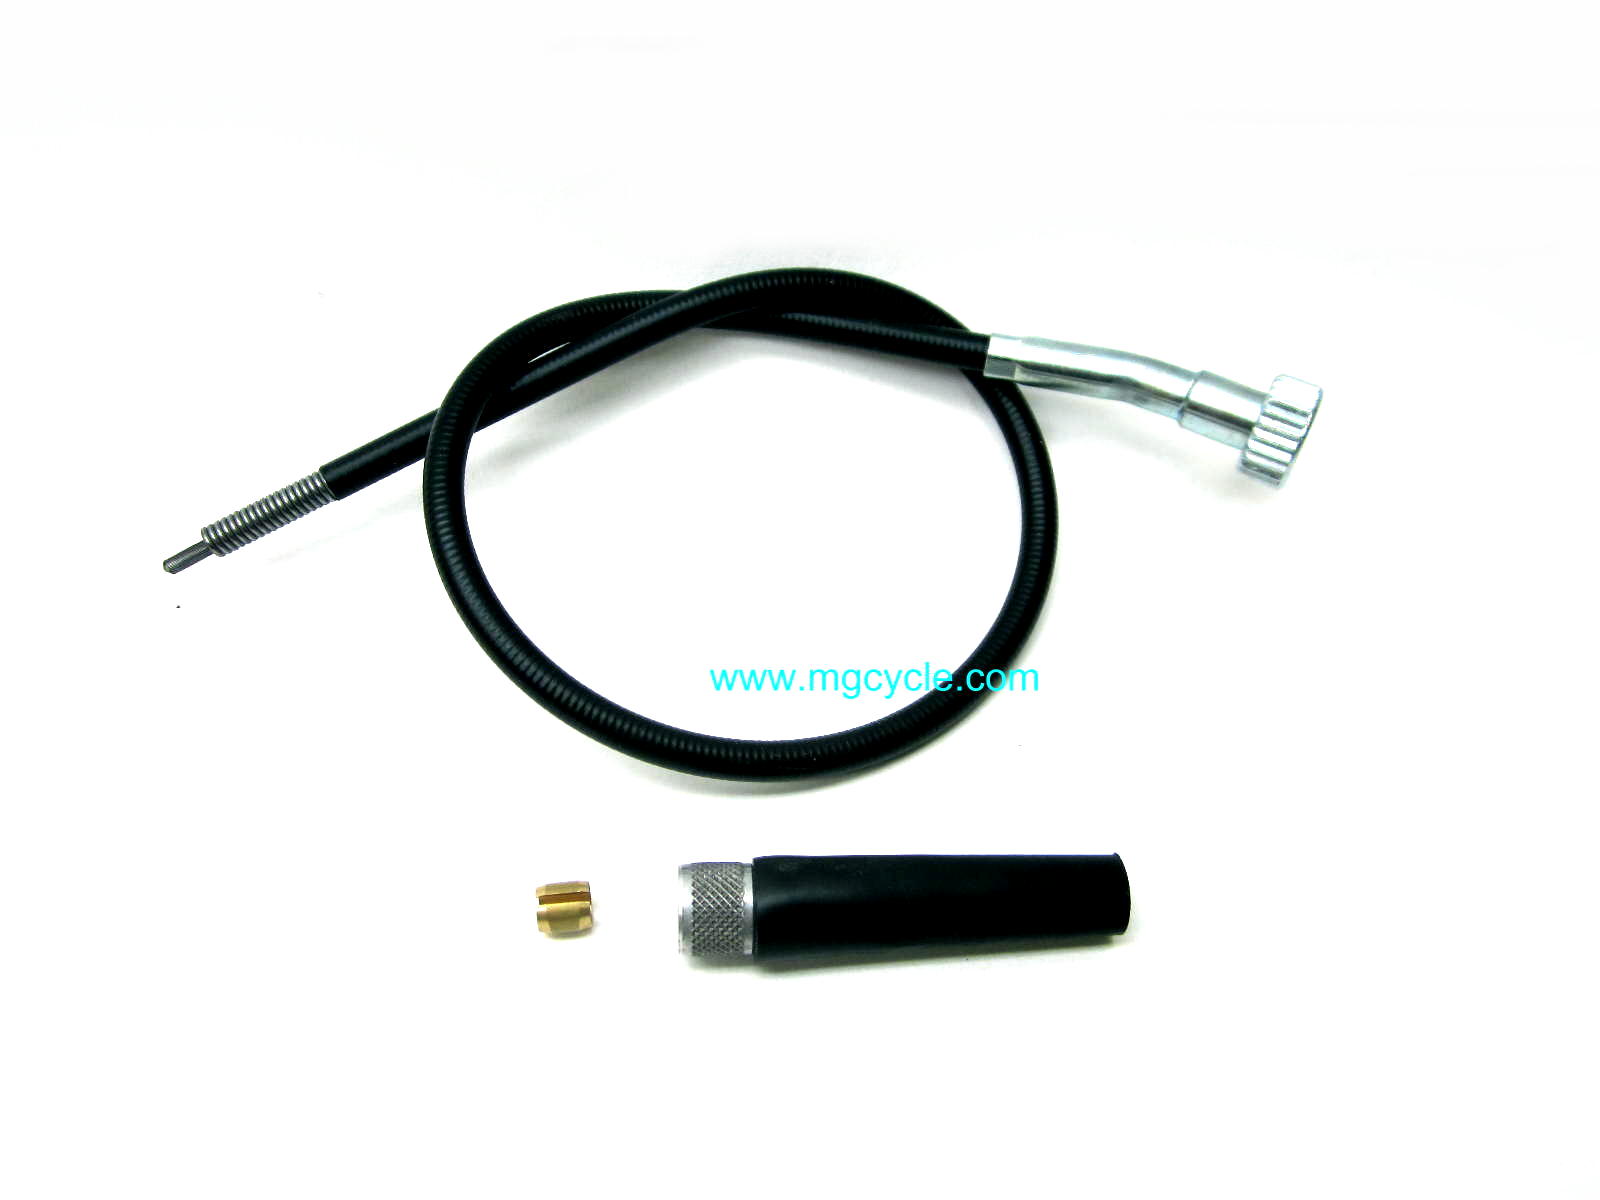 Tach cable complete LMI,II